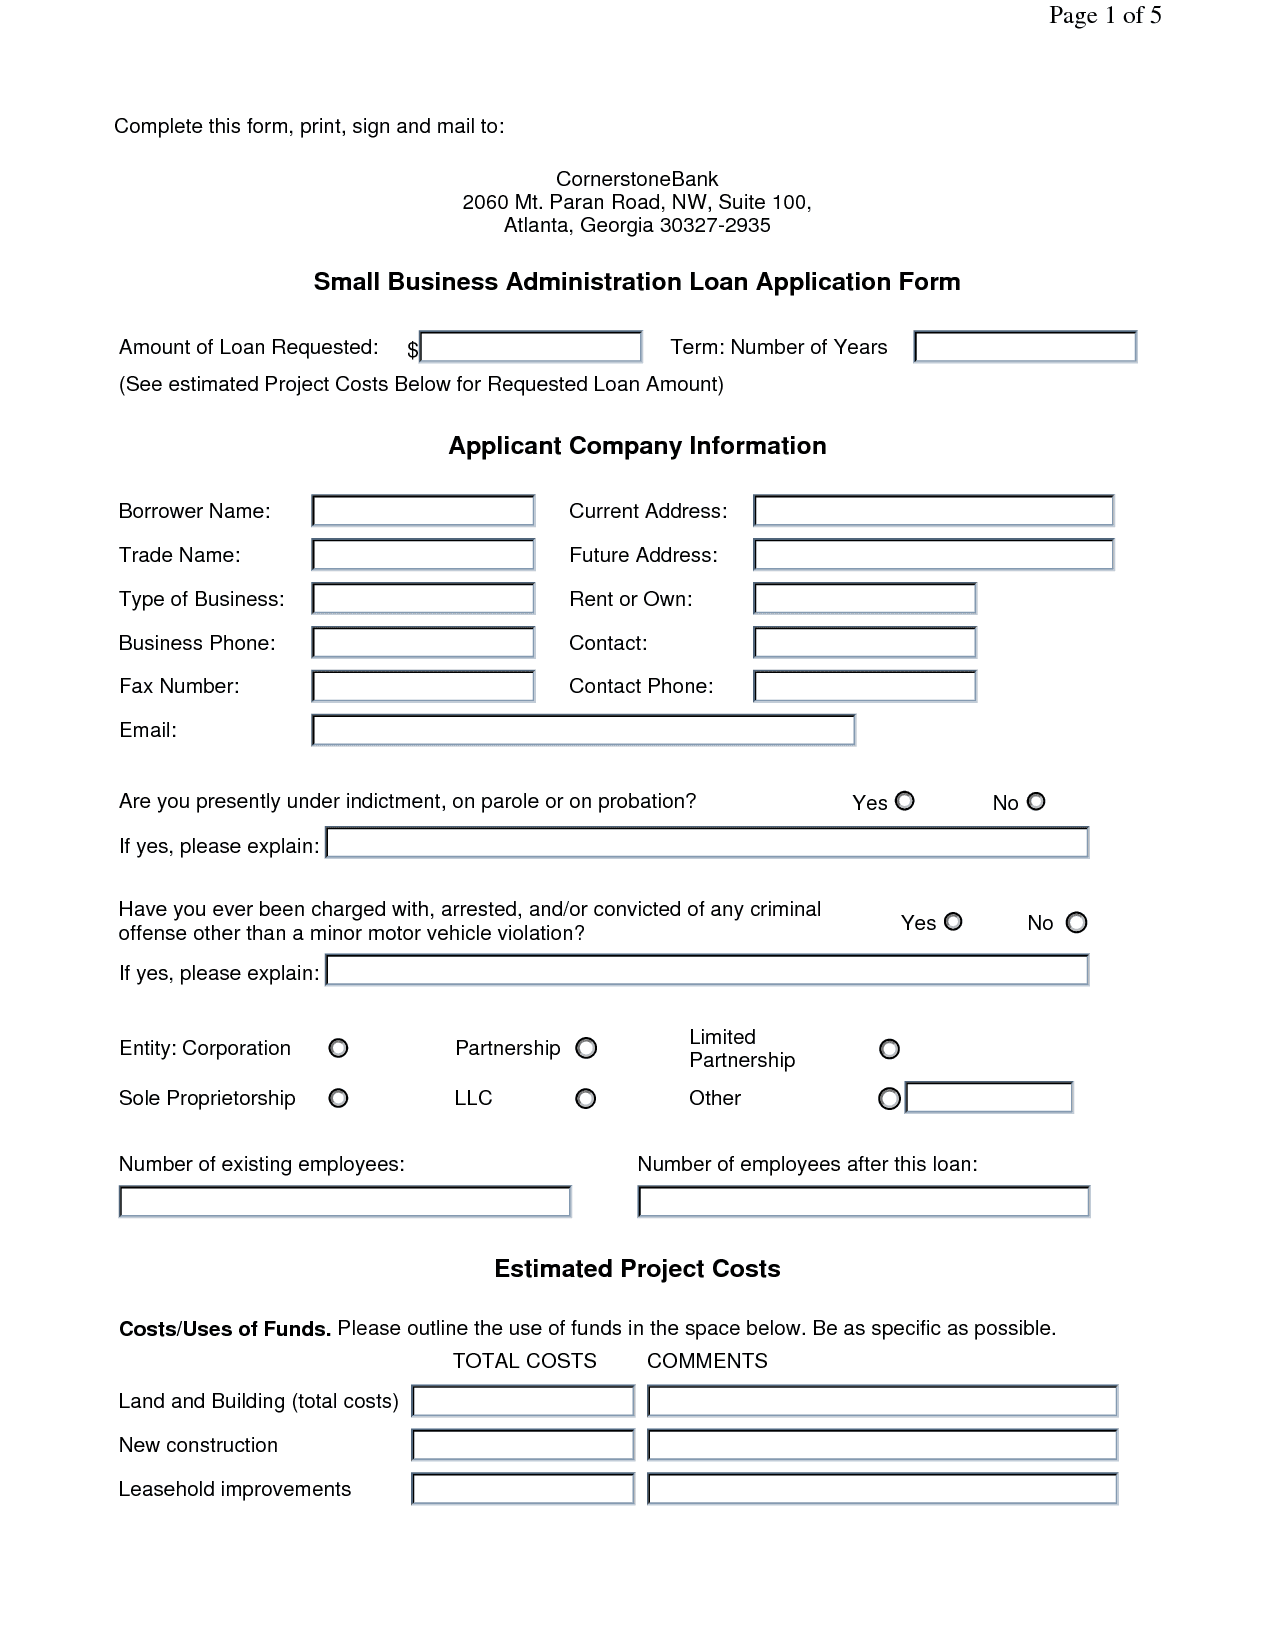 types of business form